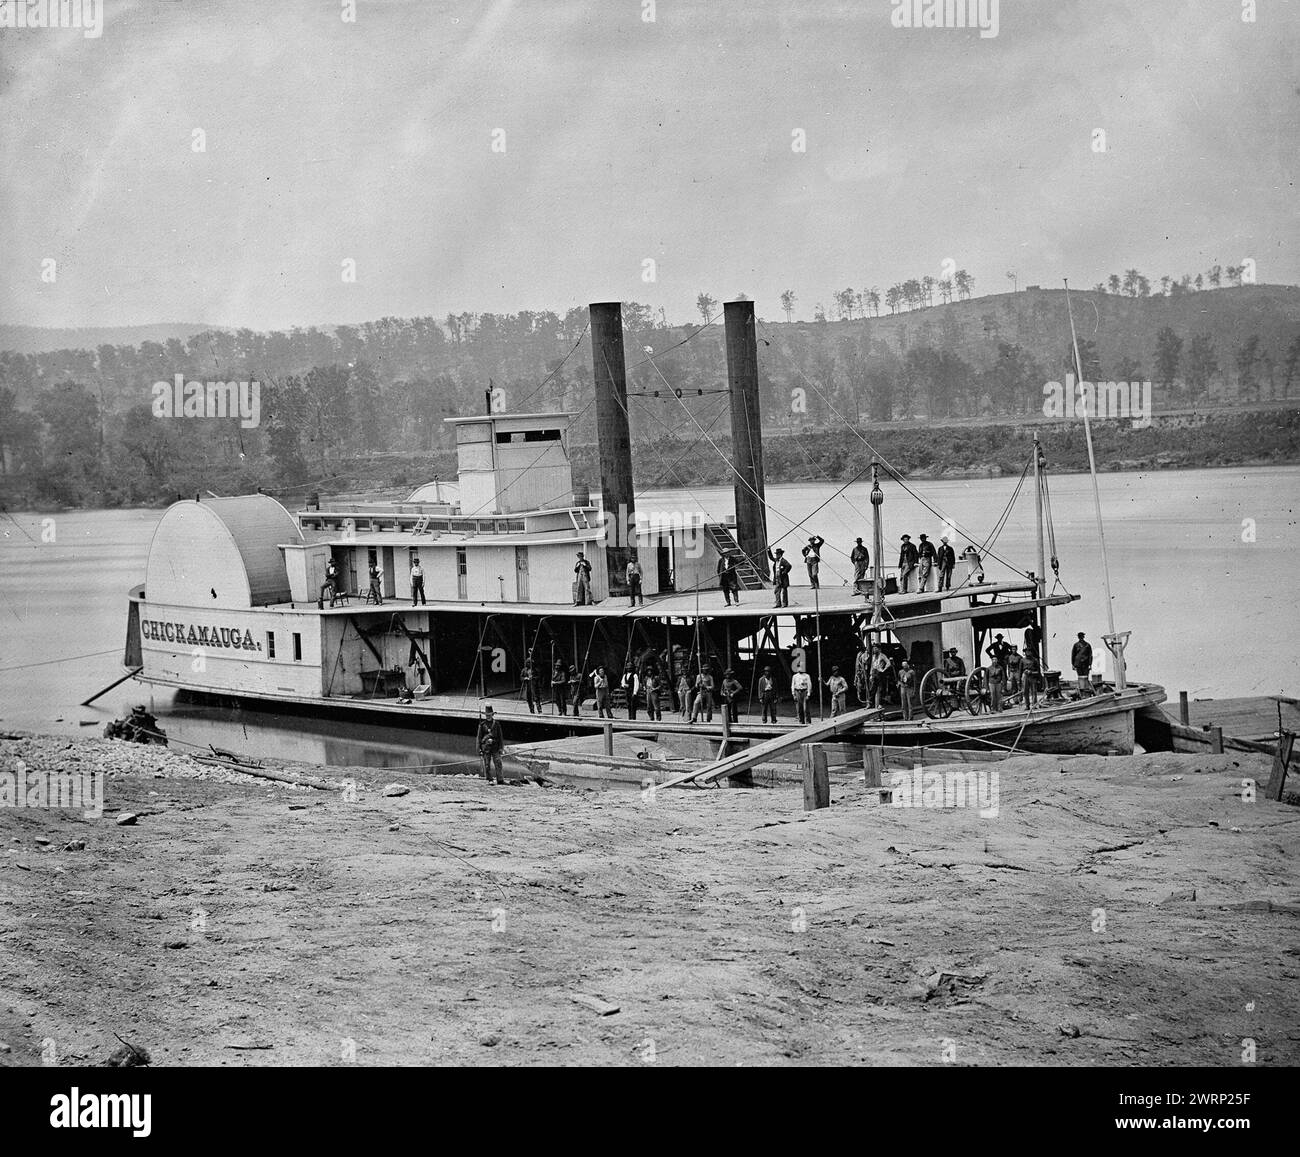 Chickamauga (transport steamer) on Tennessee River, circa 1865 Stock Photo